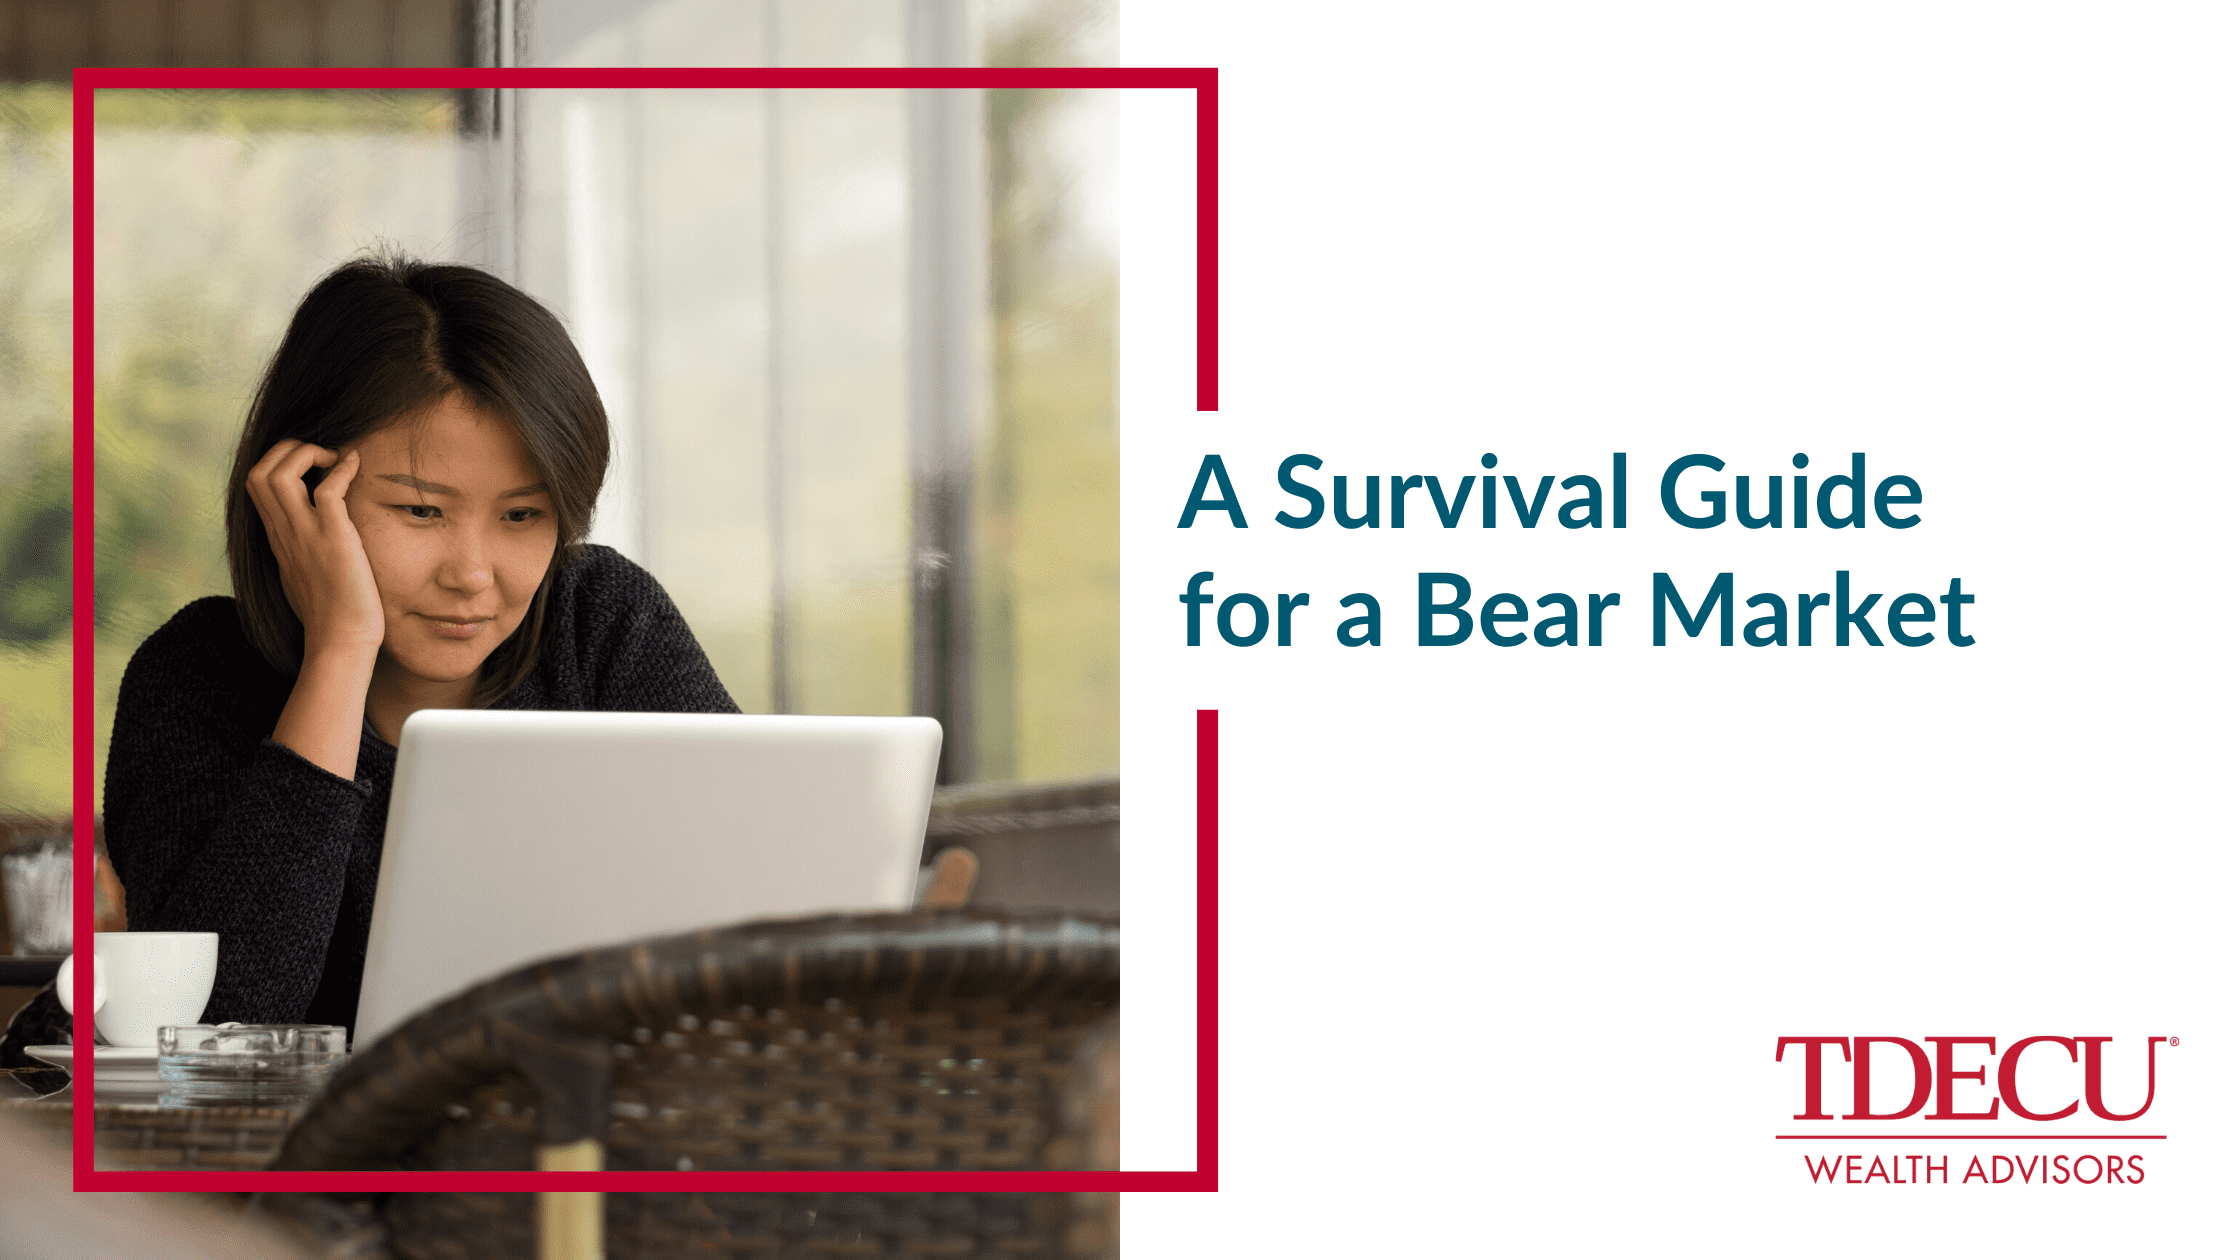 A Survival Guide for a Bear Market